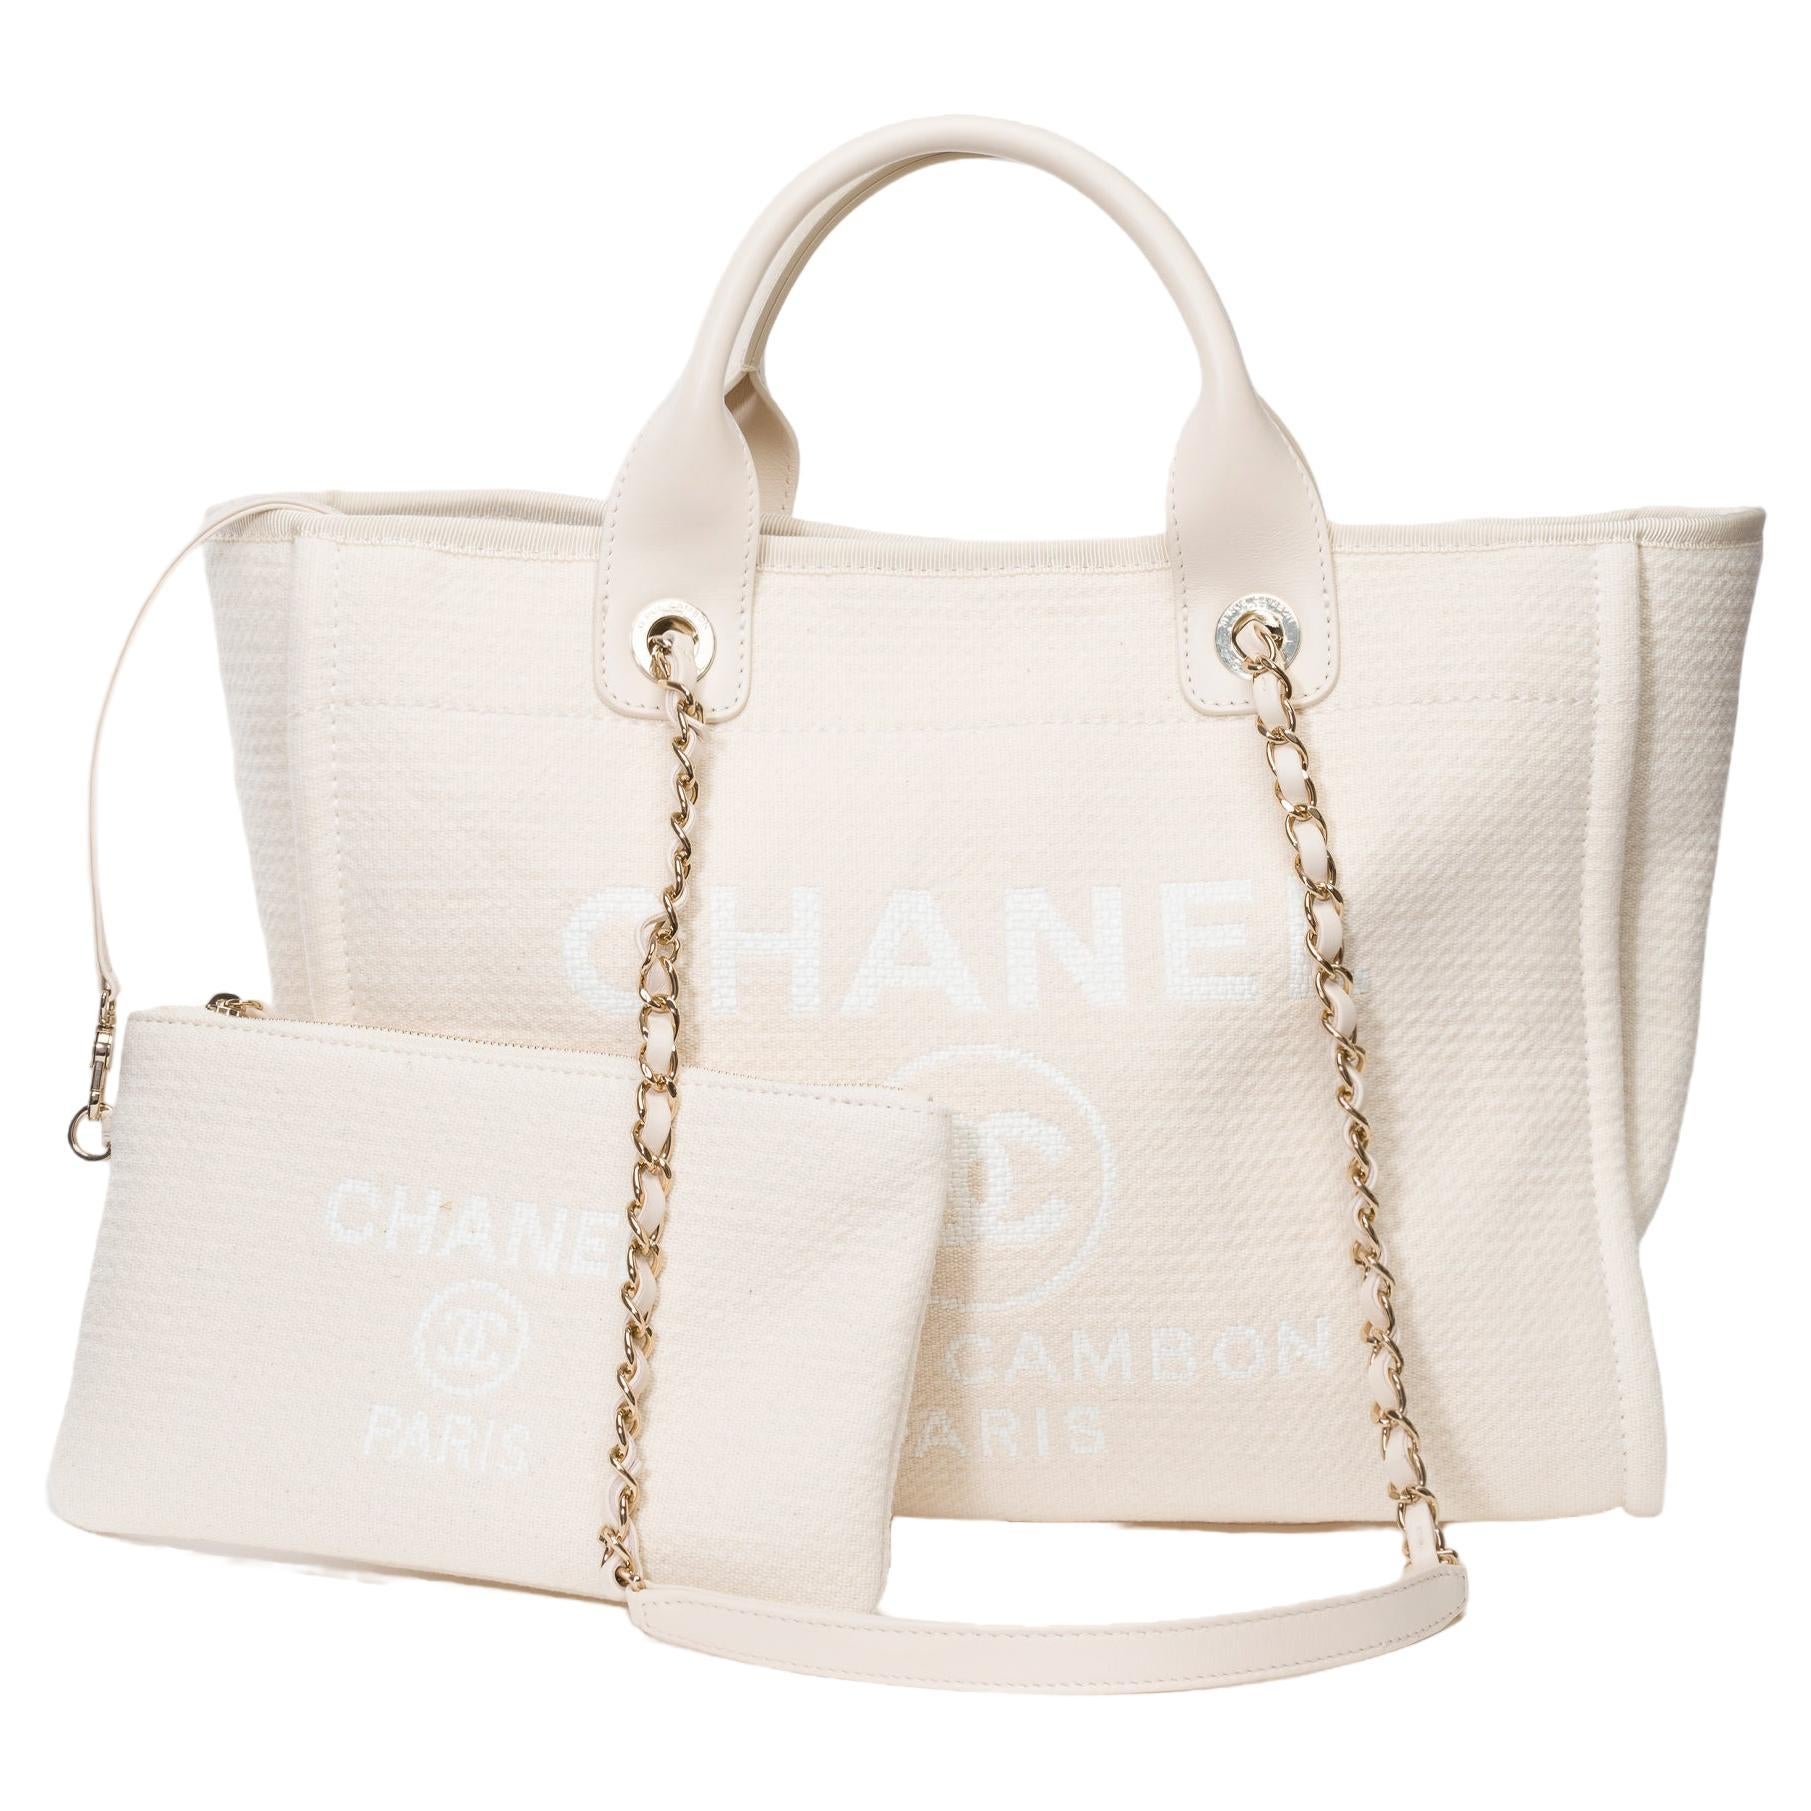 Amazing Chanel Deauville tote bag in off white canvas, SHW